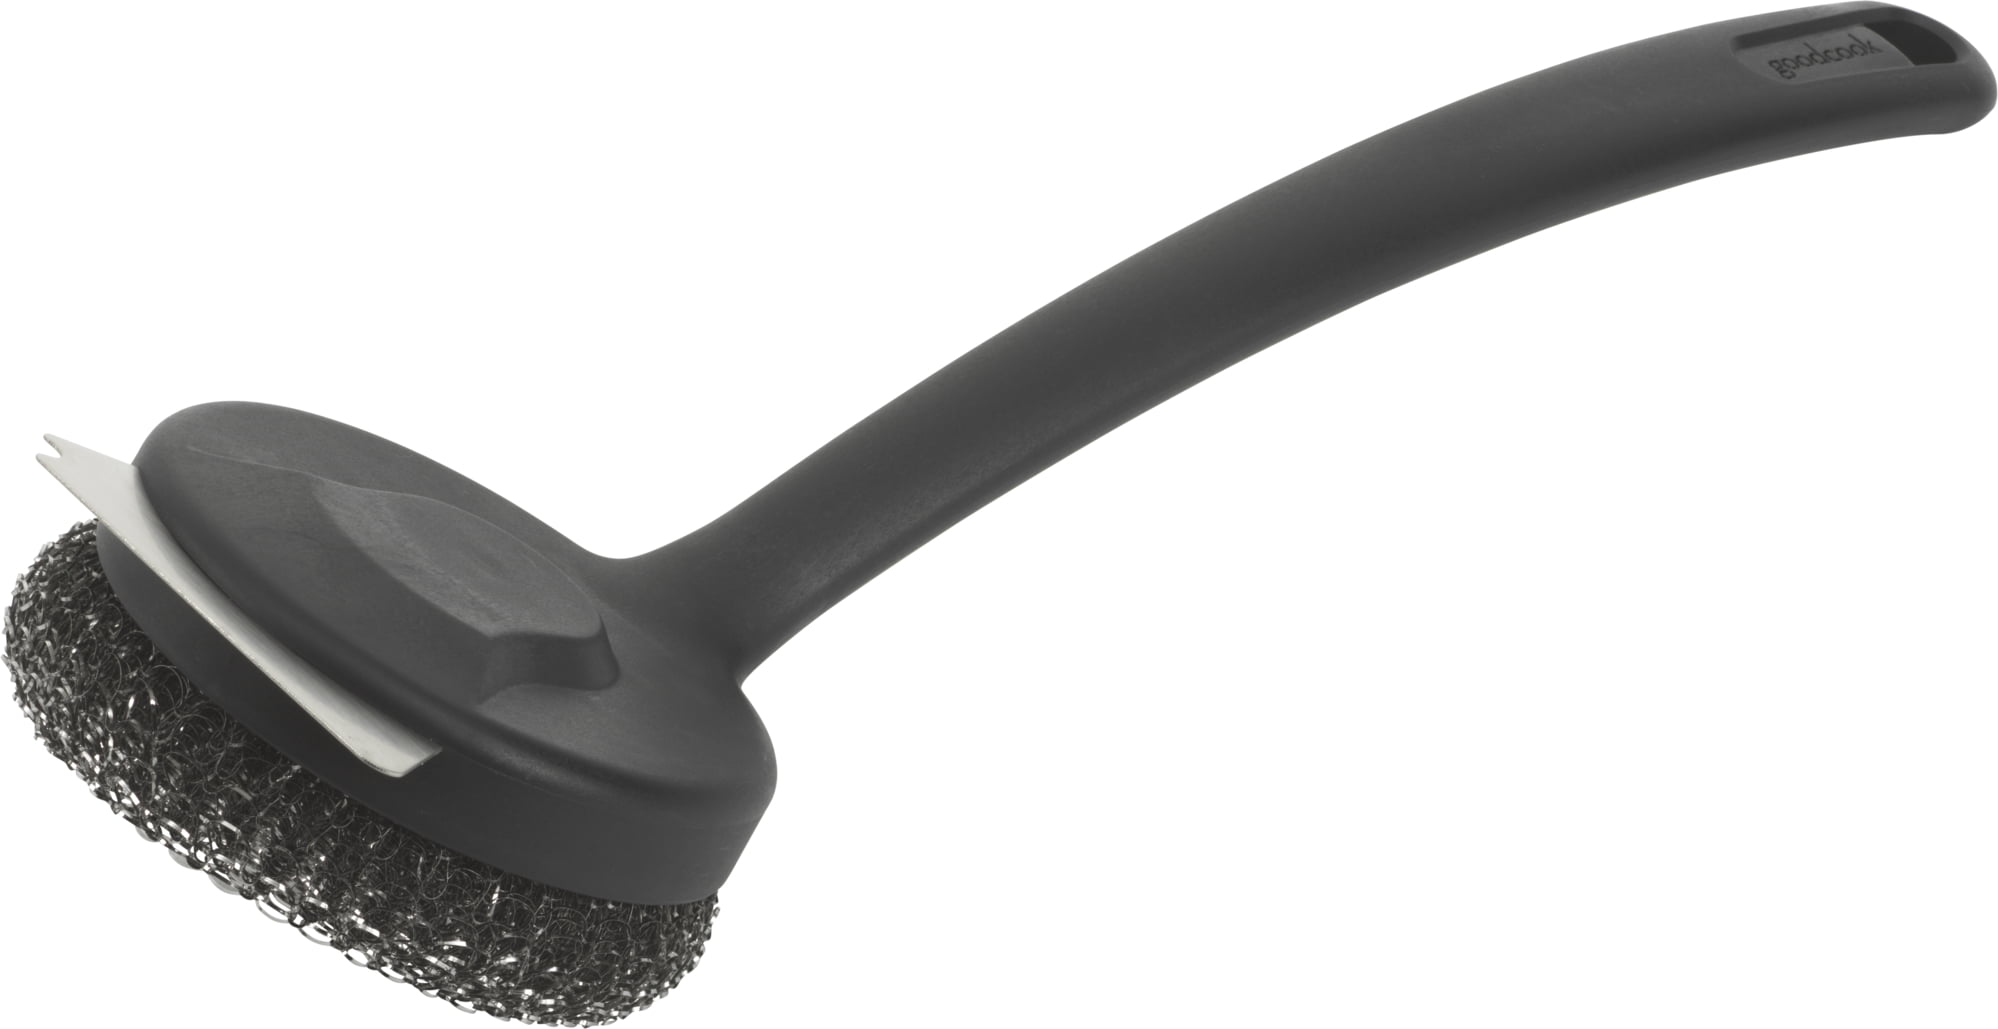 I'm Trying out an Oxo Nylon Grill Brush